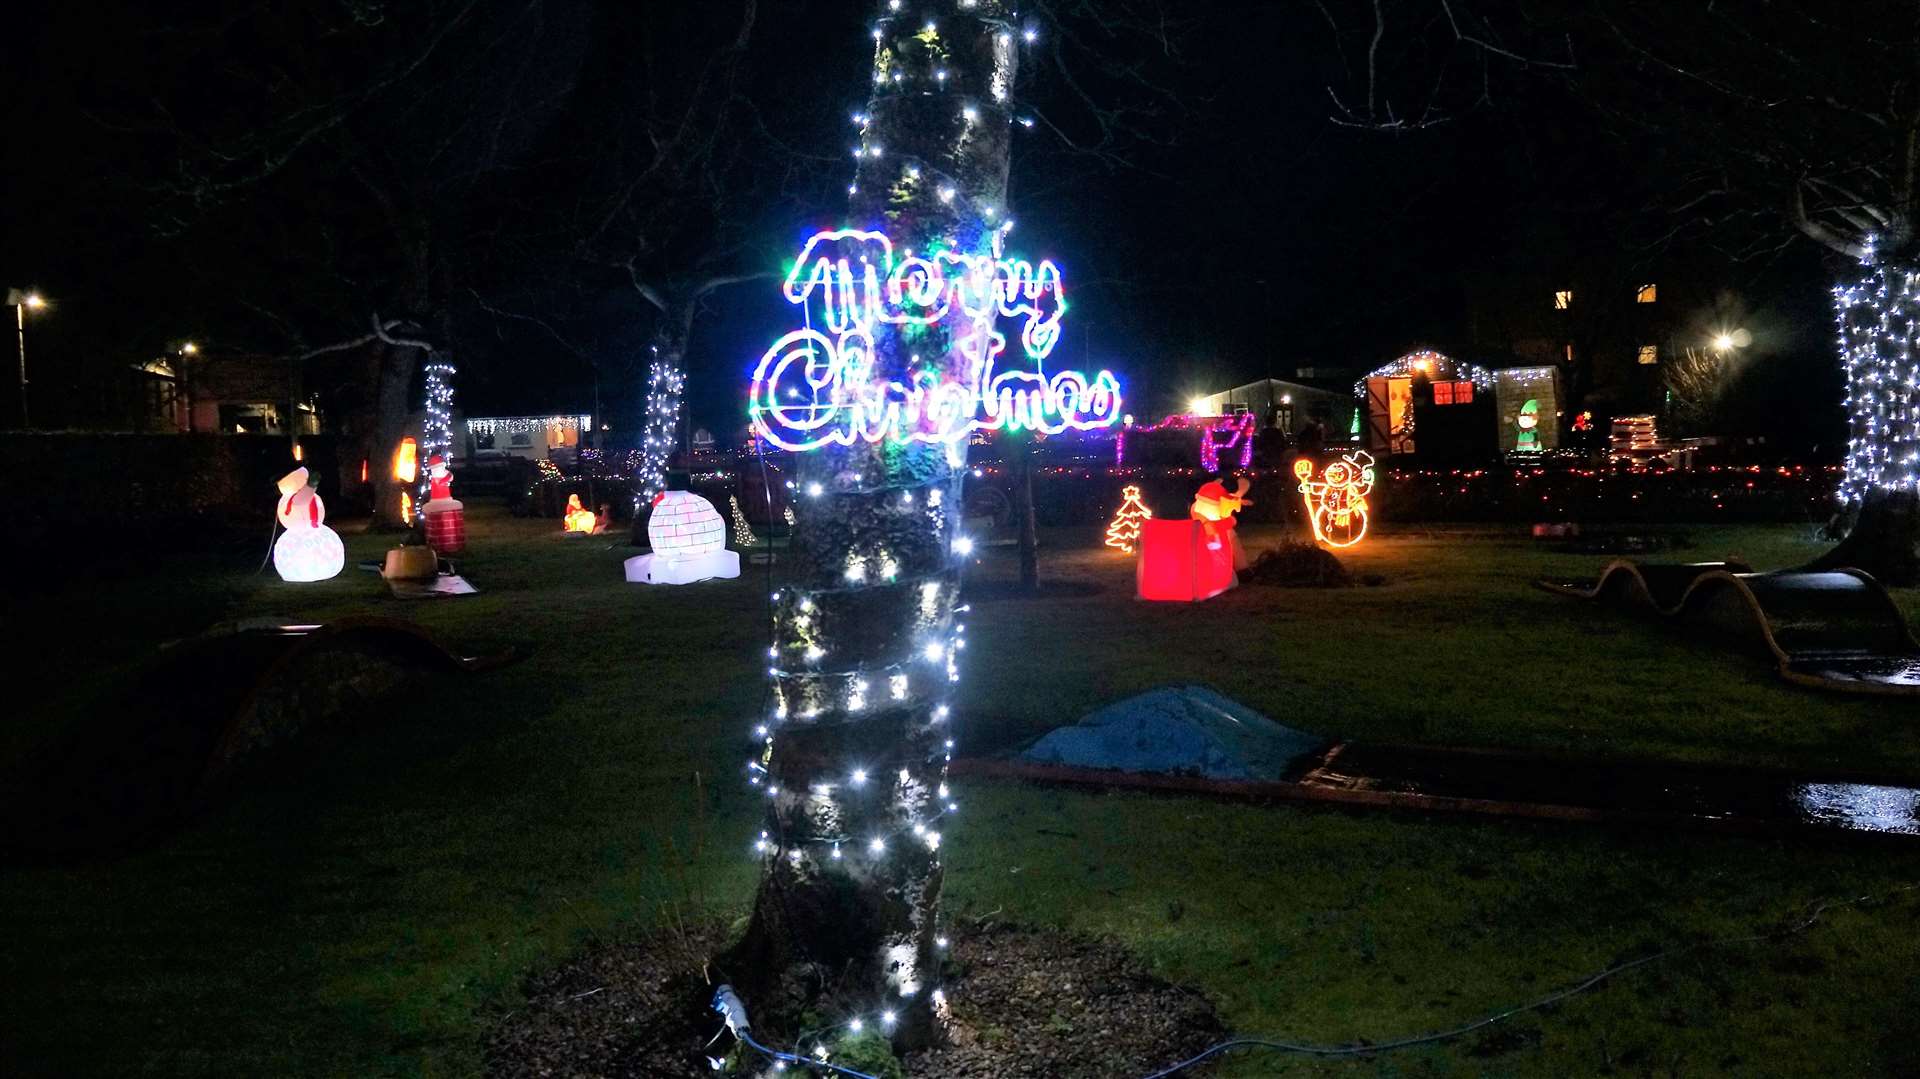 Santaland will again be a festive attraction in Wick thanks to the volunteers of the Christmas lights committee.